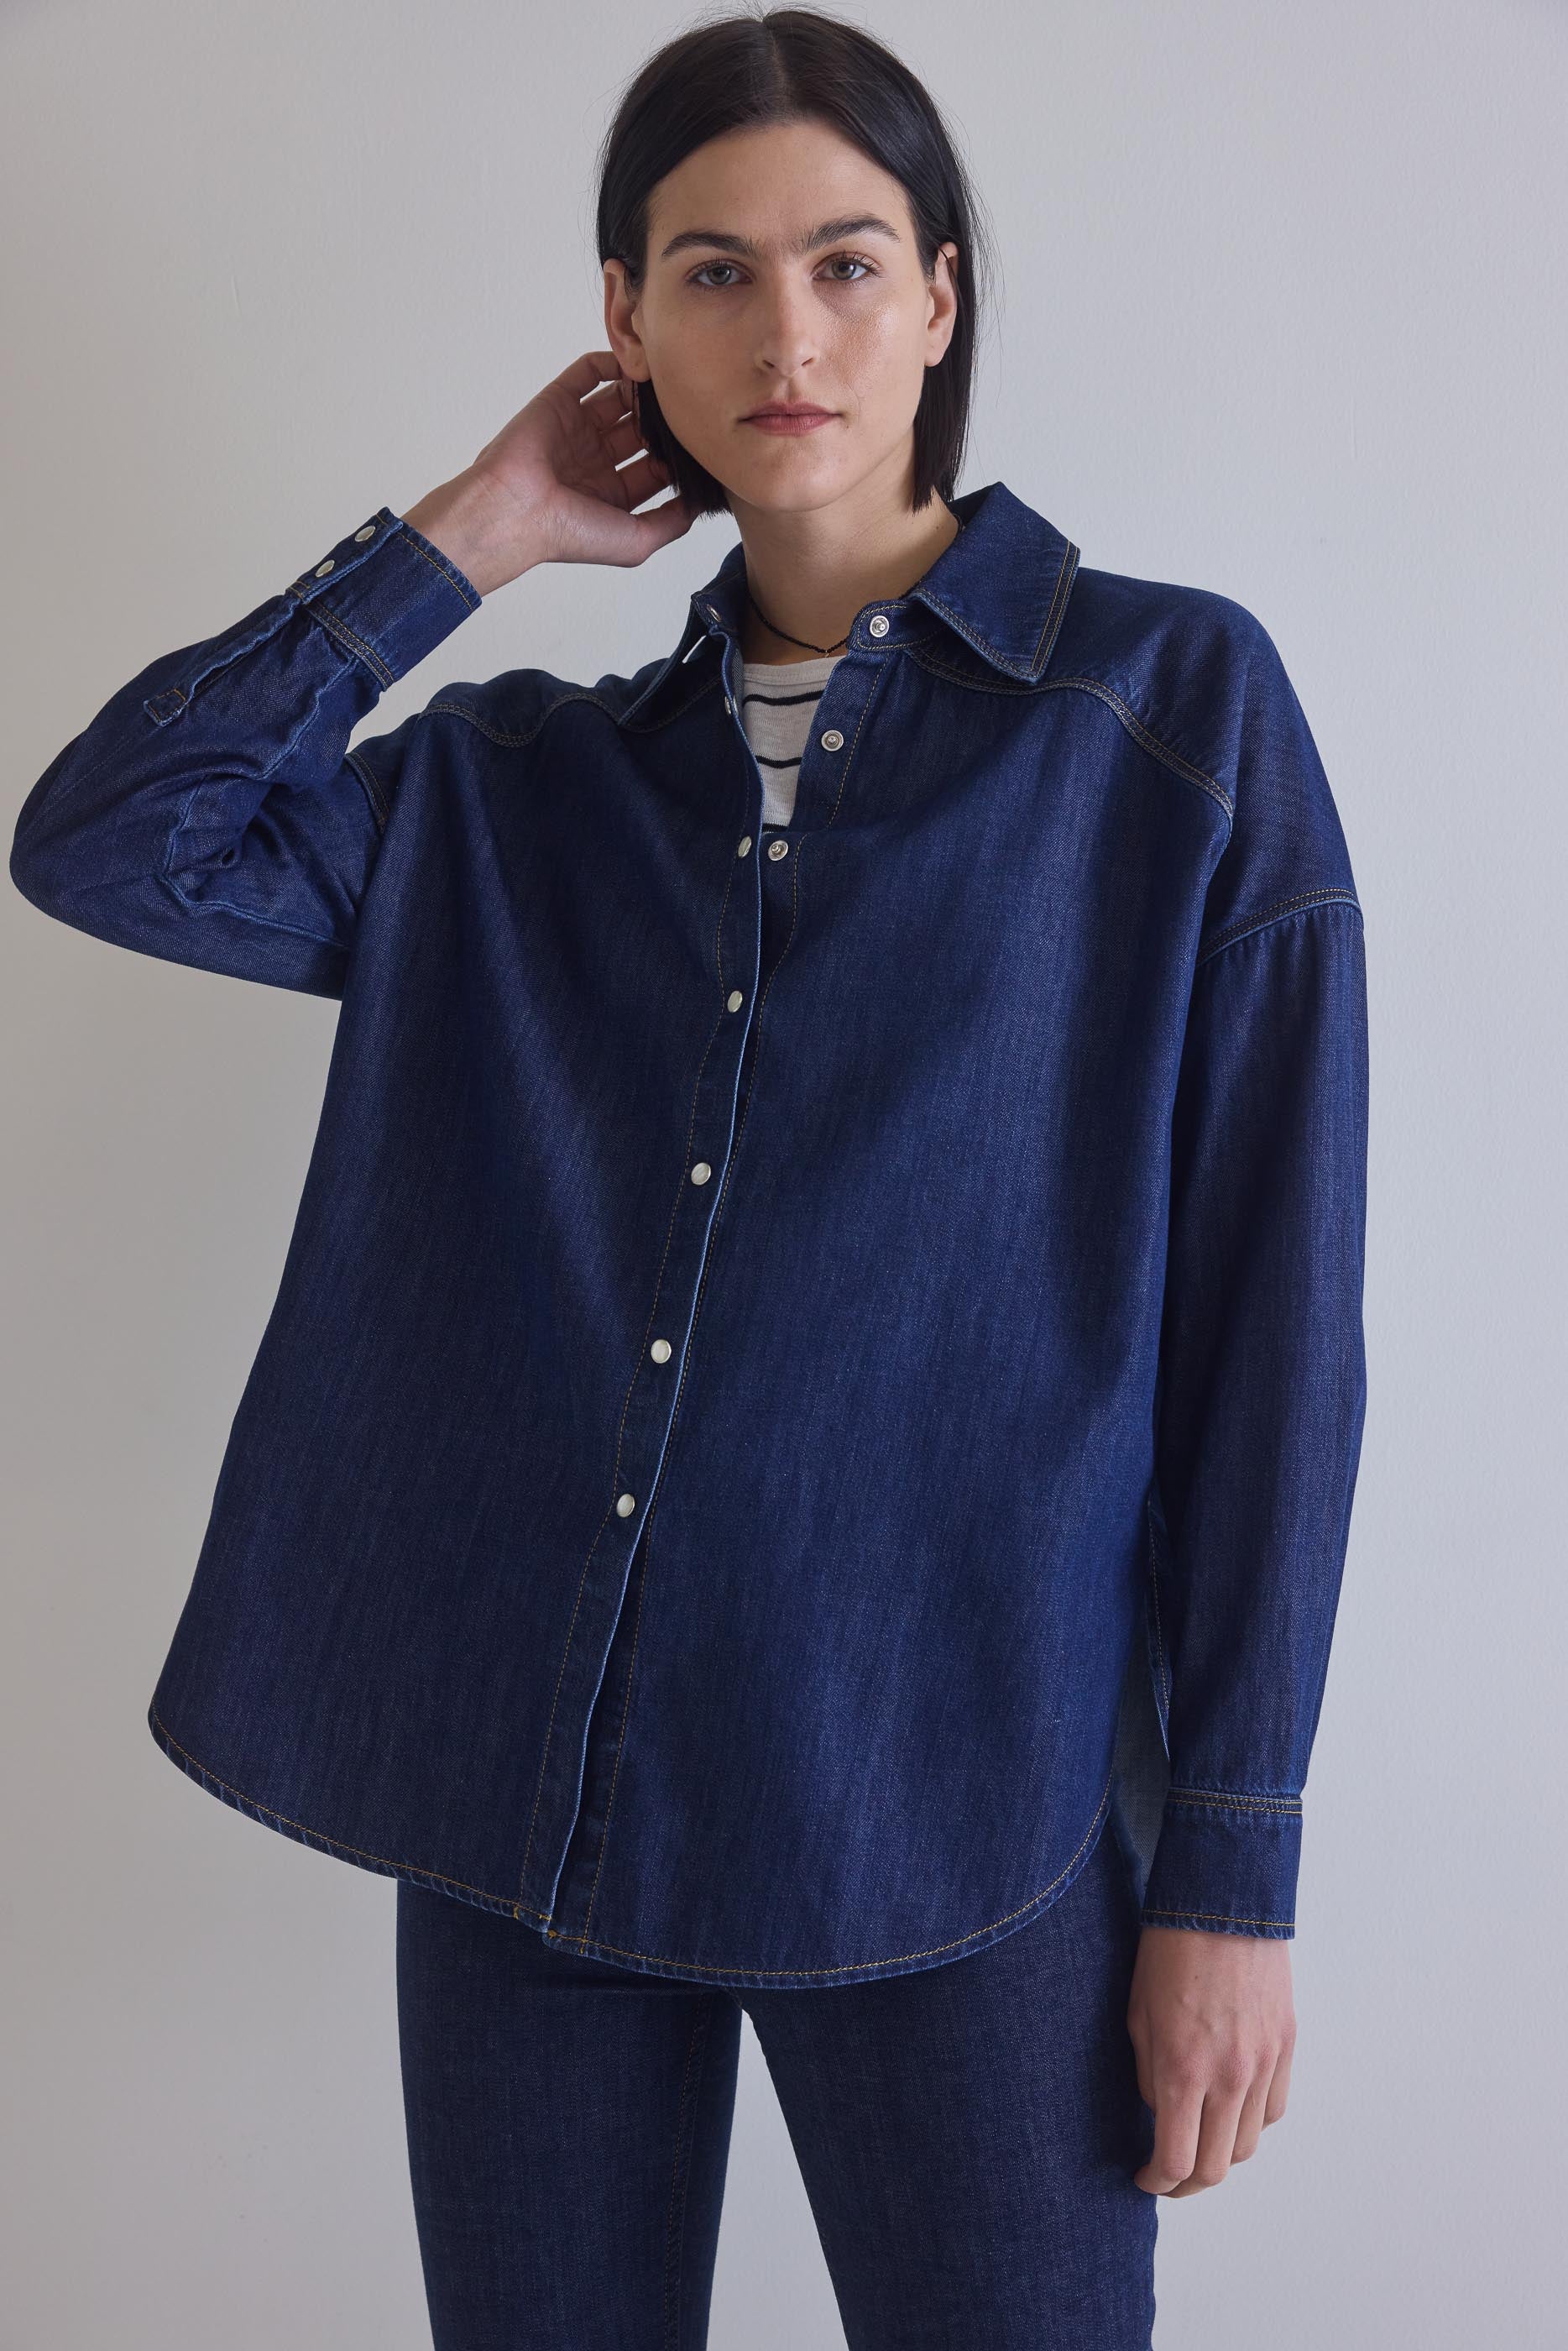 Women's Clothing - Dresses, Pants & Blouses - Chico's | Long denim shirt,  Chambray shirt outfits, Clothes